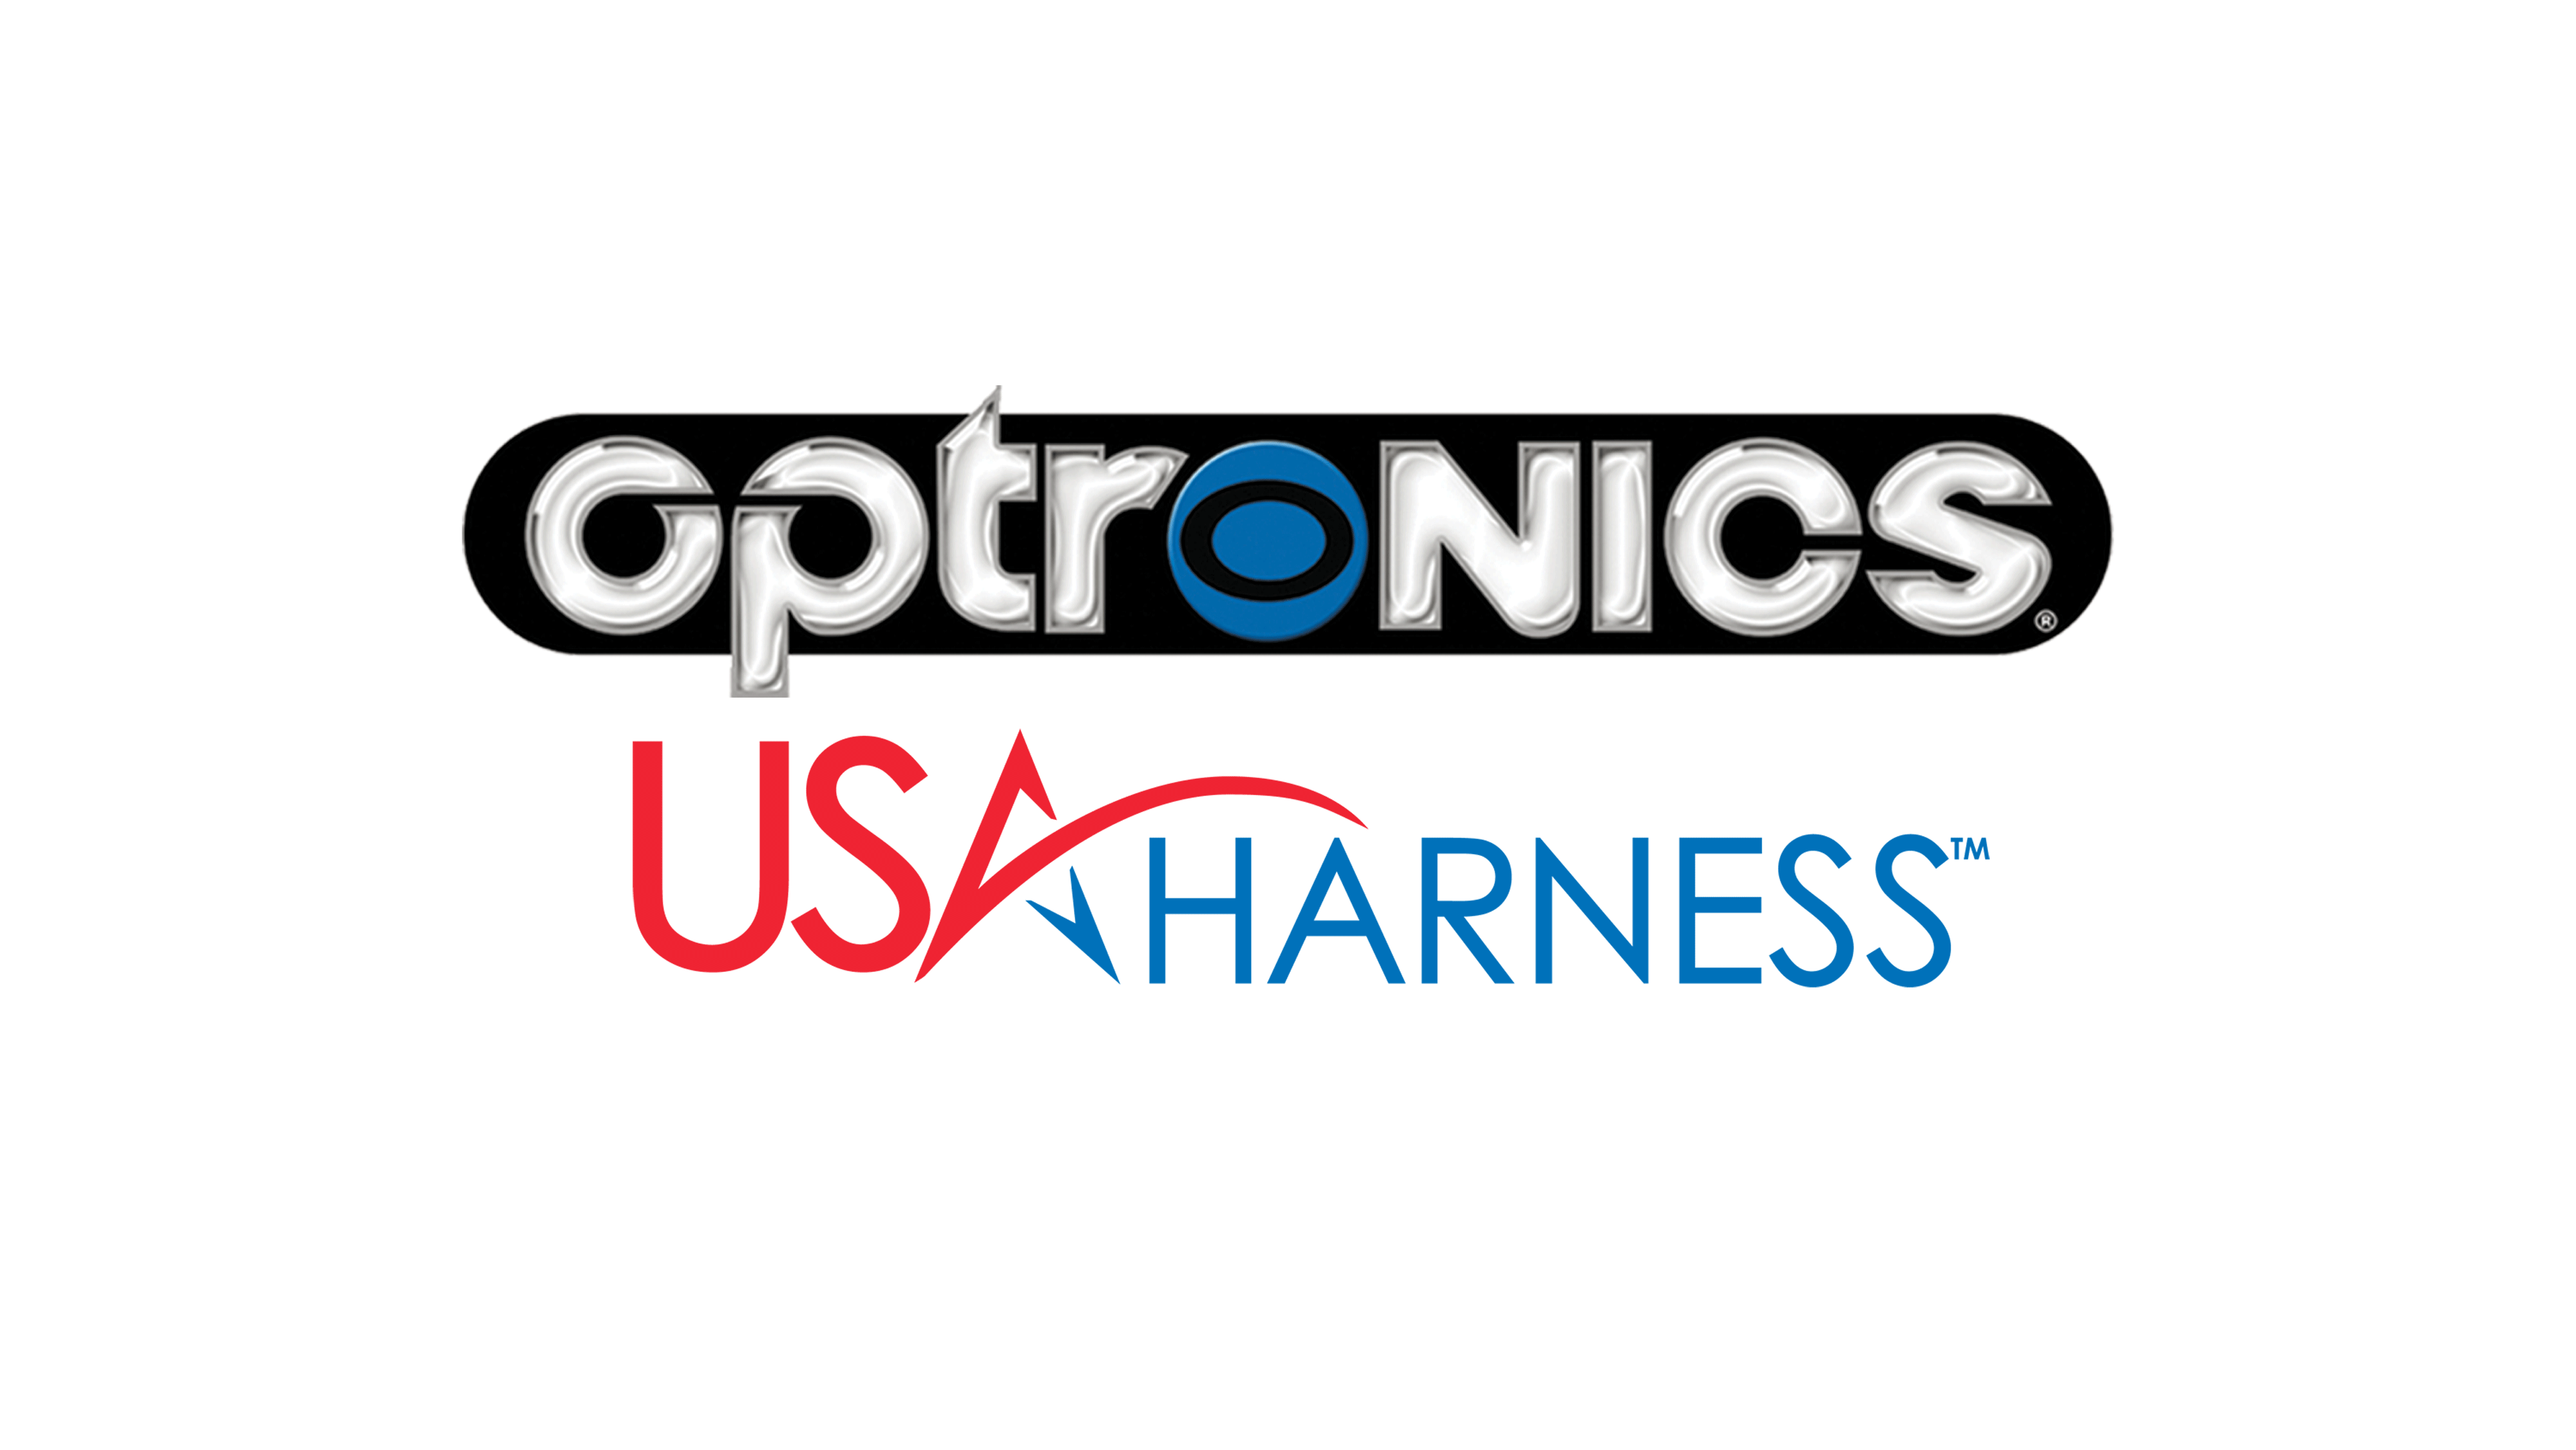 Optronics International is a leading manufacturer of vehicle harnesses, electronic control systems and LED lighting for the global transportation industry.